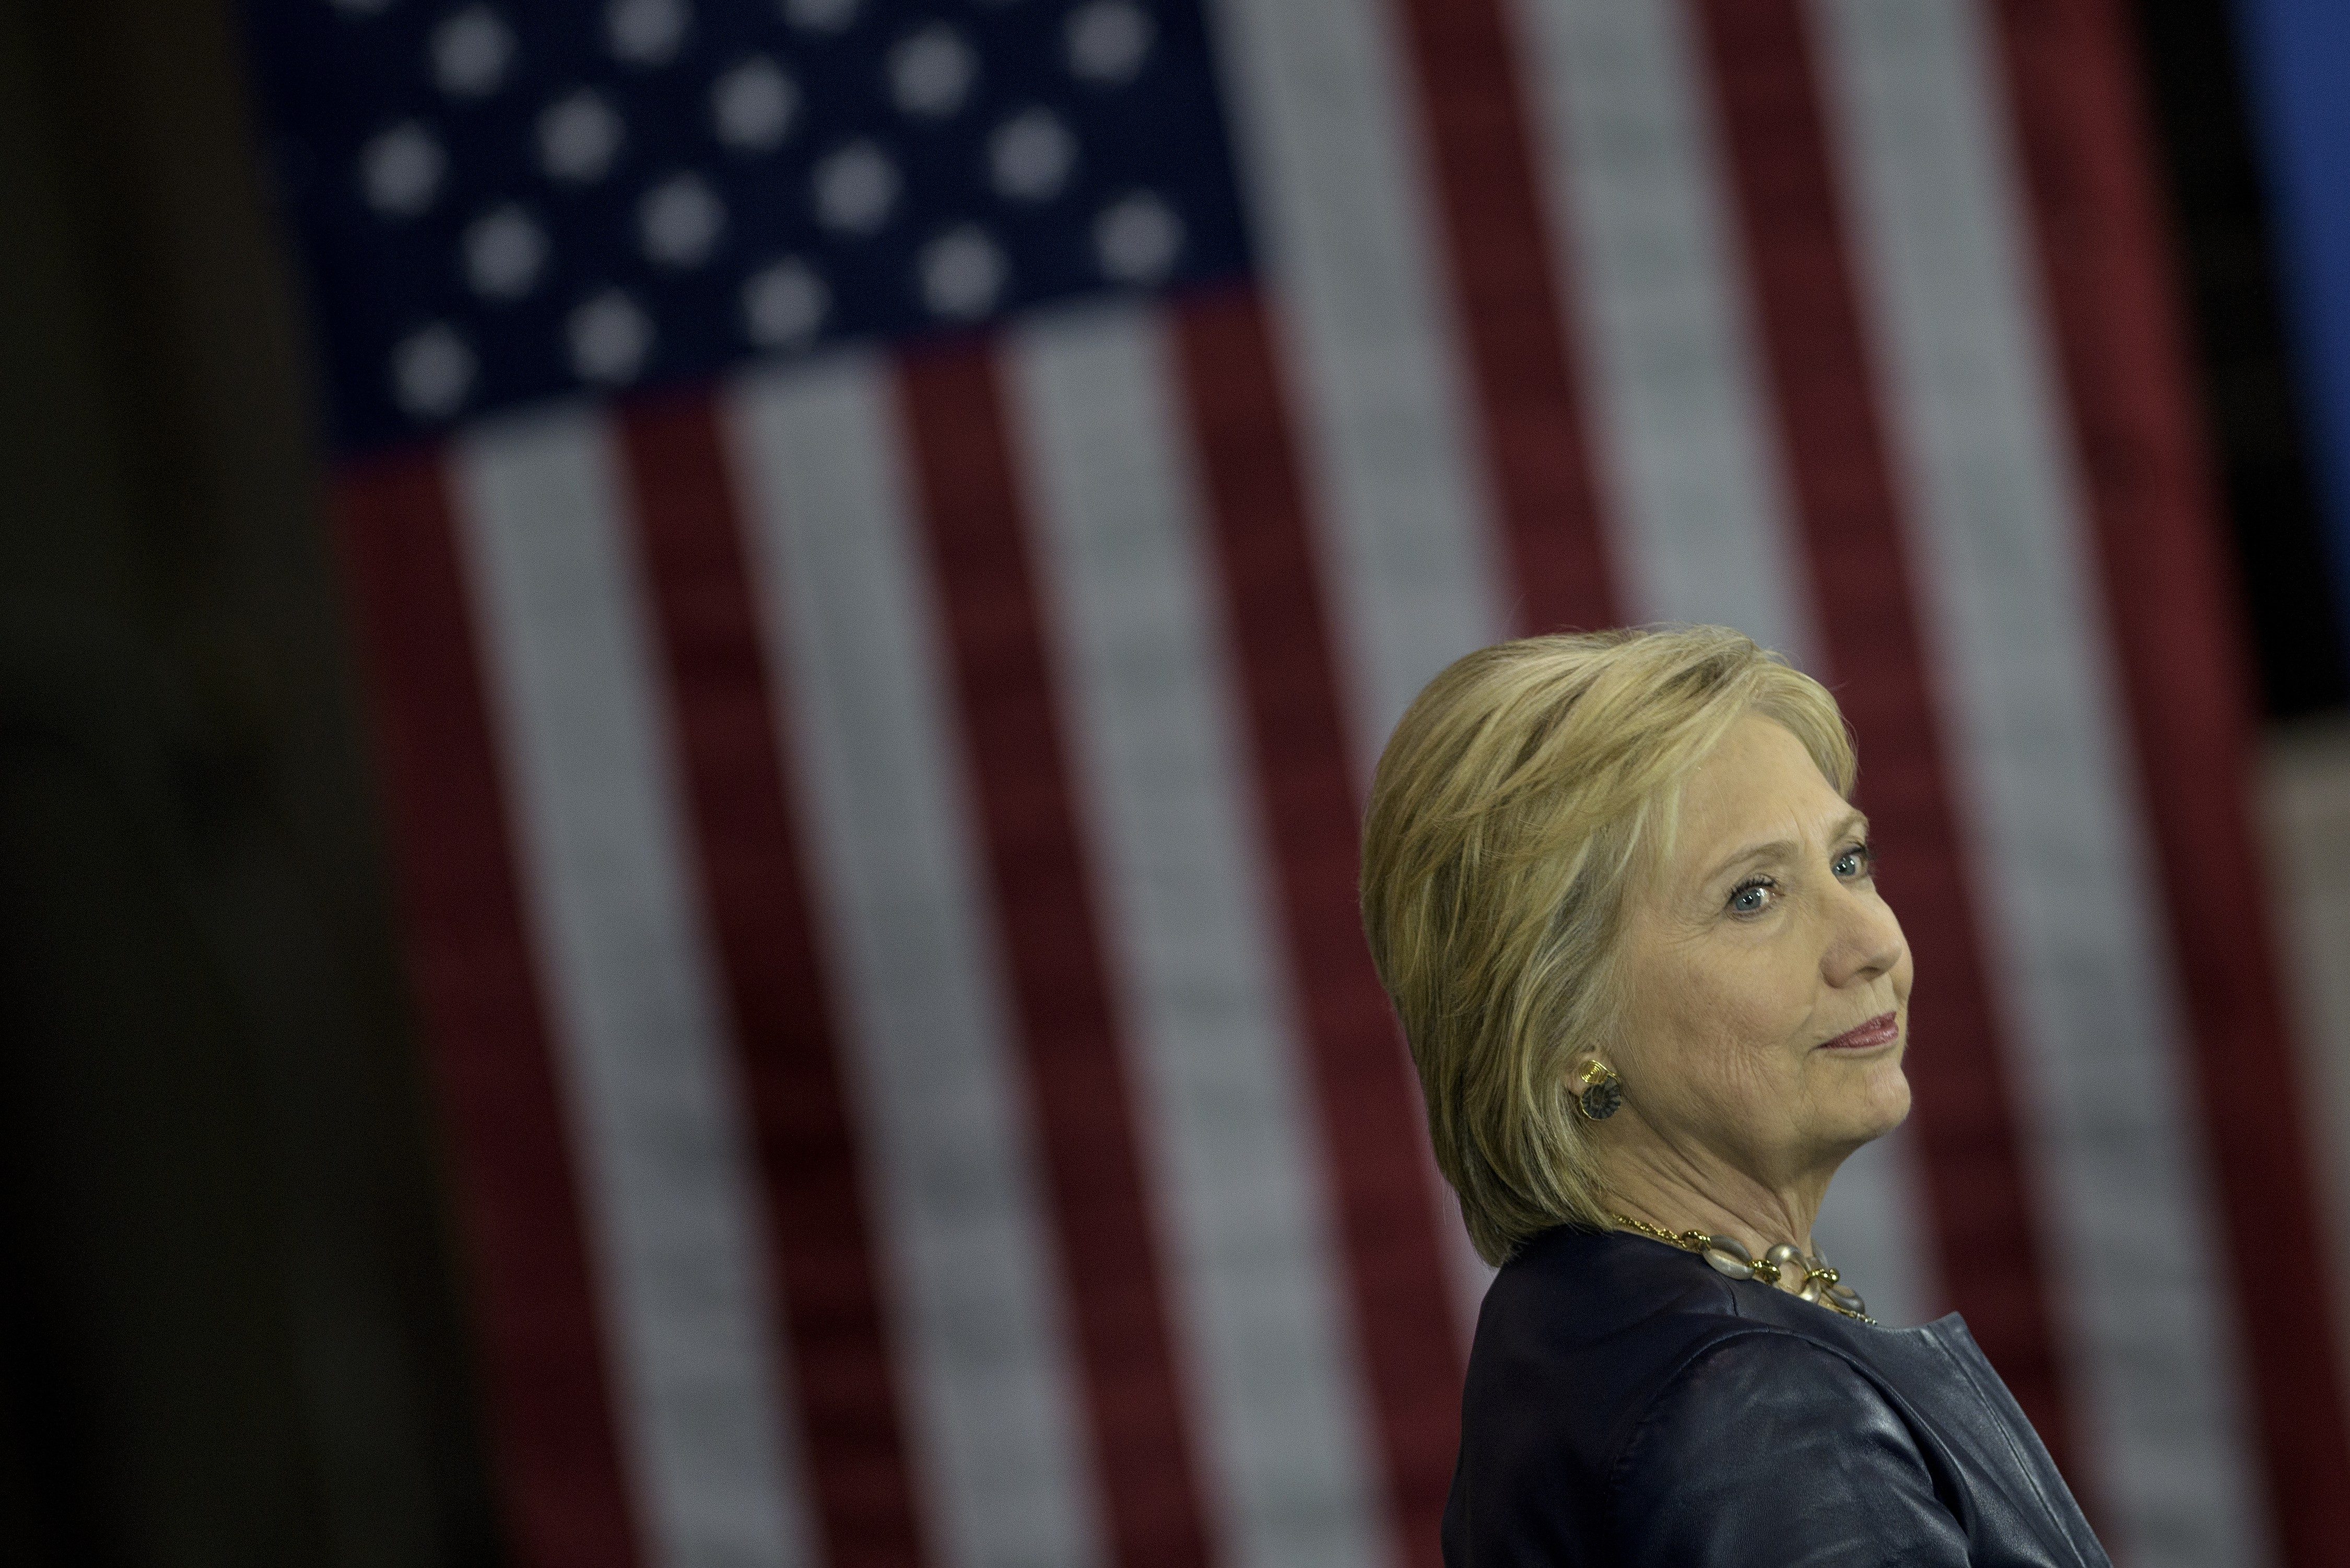 Democratic presidential candidate Hillary Clinton waits to address a rally on March 12, 2016 in Youngstown, Ohio. / AFP PHOTO / Brendan Smialowski